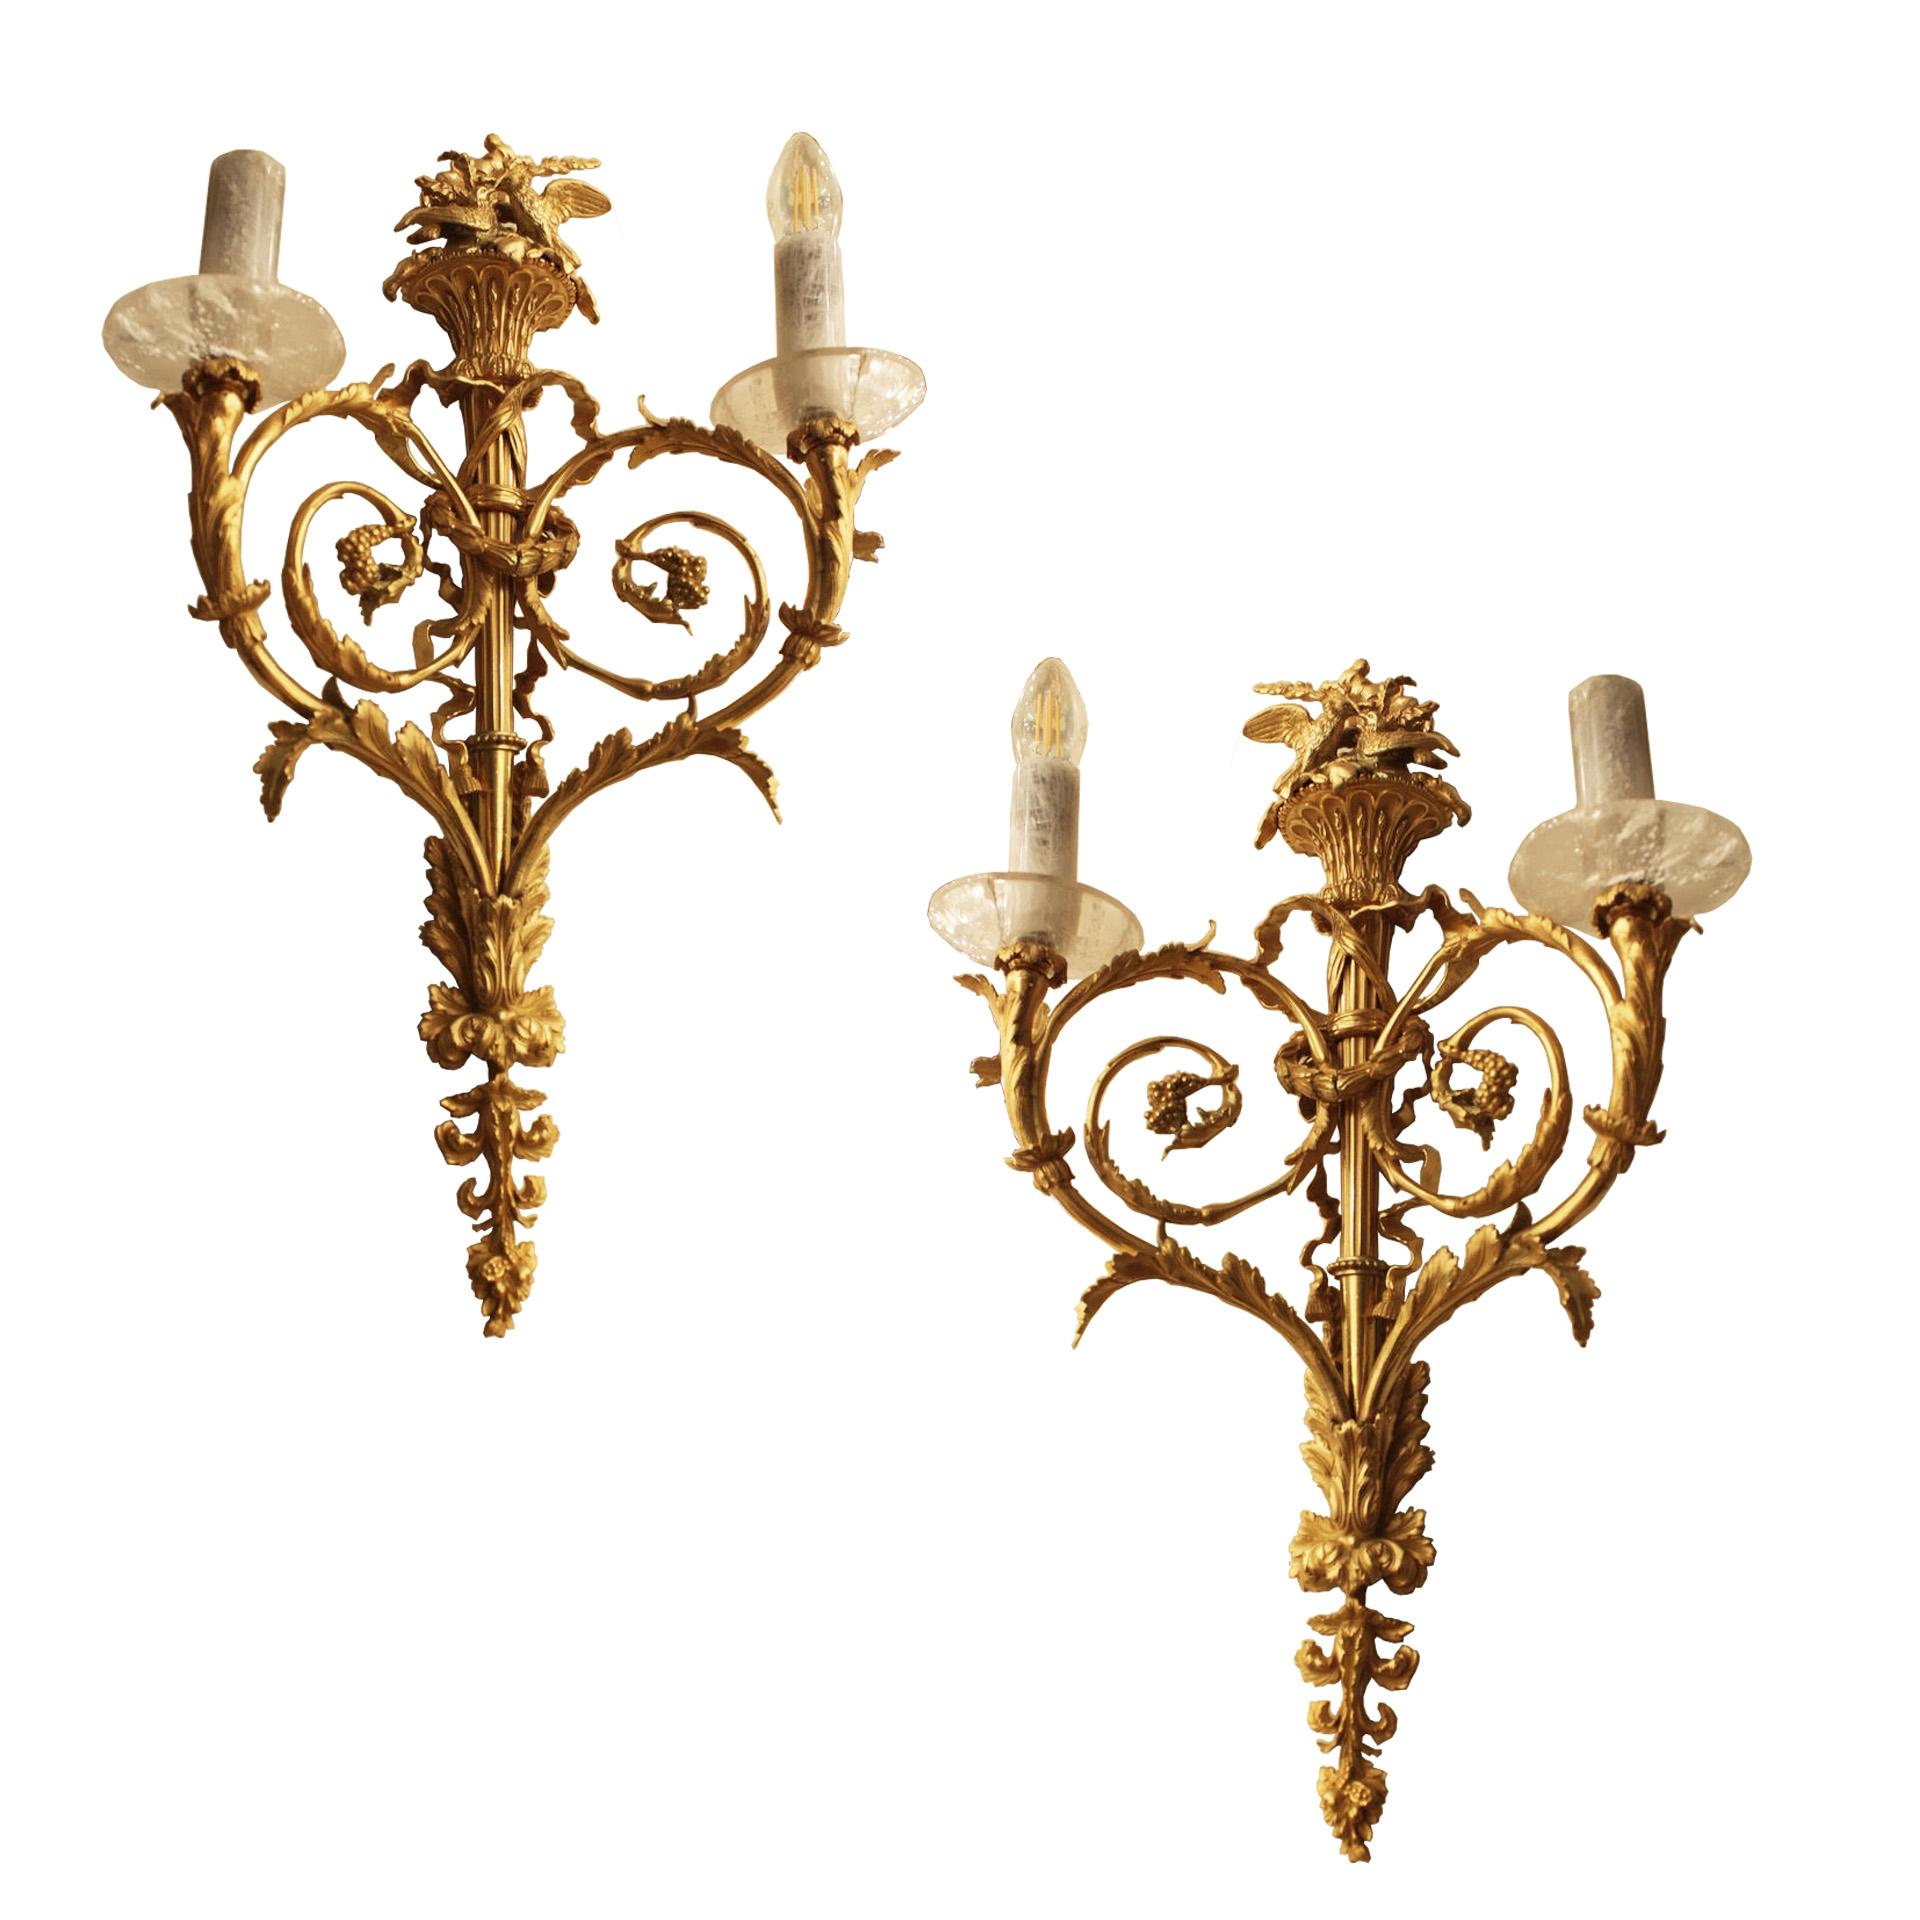 Exclusive 19th century pair of bronze French wall lights with lovely birds, decorative arms, each wall light has two lights. Each features rock crystal bobeche and candle tubes.  Could be further embellished with rock crystal drops beneath each arm